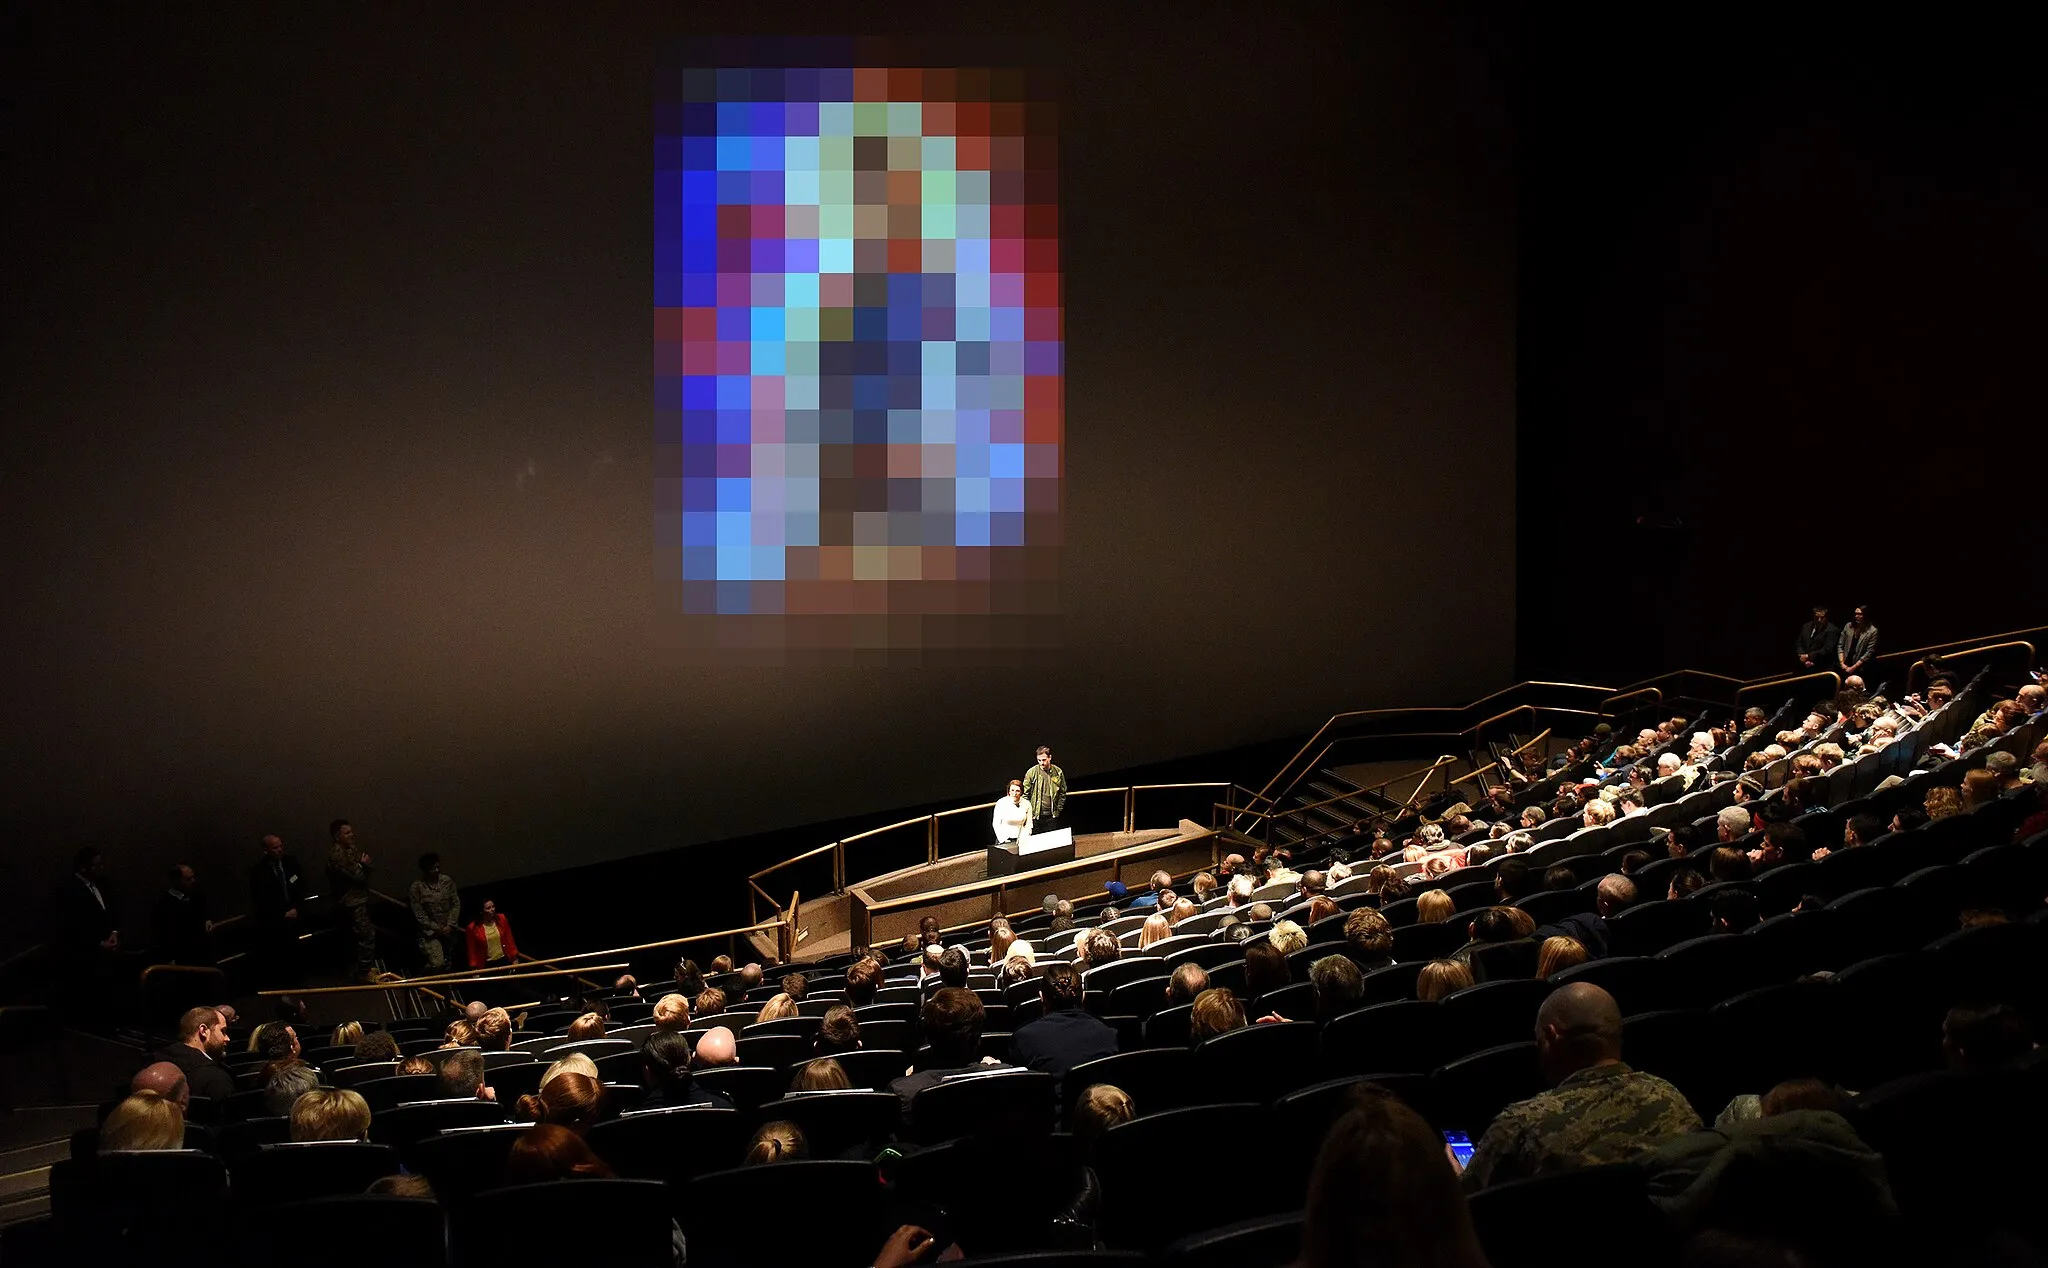 Photo showing: Captain Marvel Co-Directors Anna Boden and Ryan Fleck give remarks during a screening of Captain Marvel in Washington, D.C., March 7, 2019. The screening was held to highlight Air Force collaboration with Disney and the inspiration behind the main character's warrior ethos: "higher, further, faster."